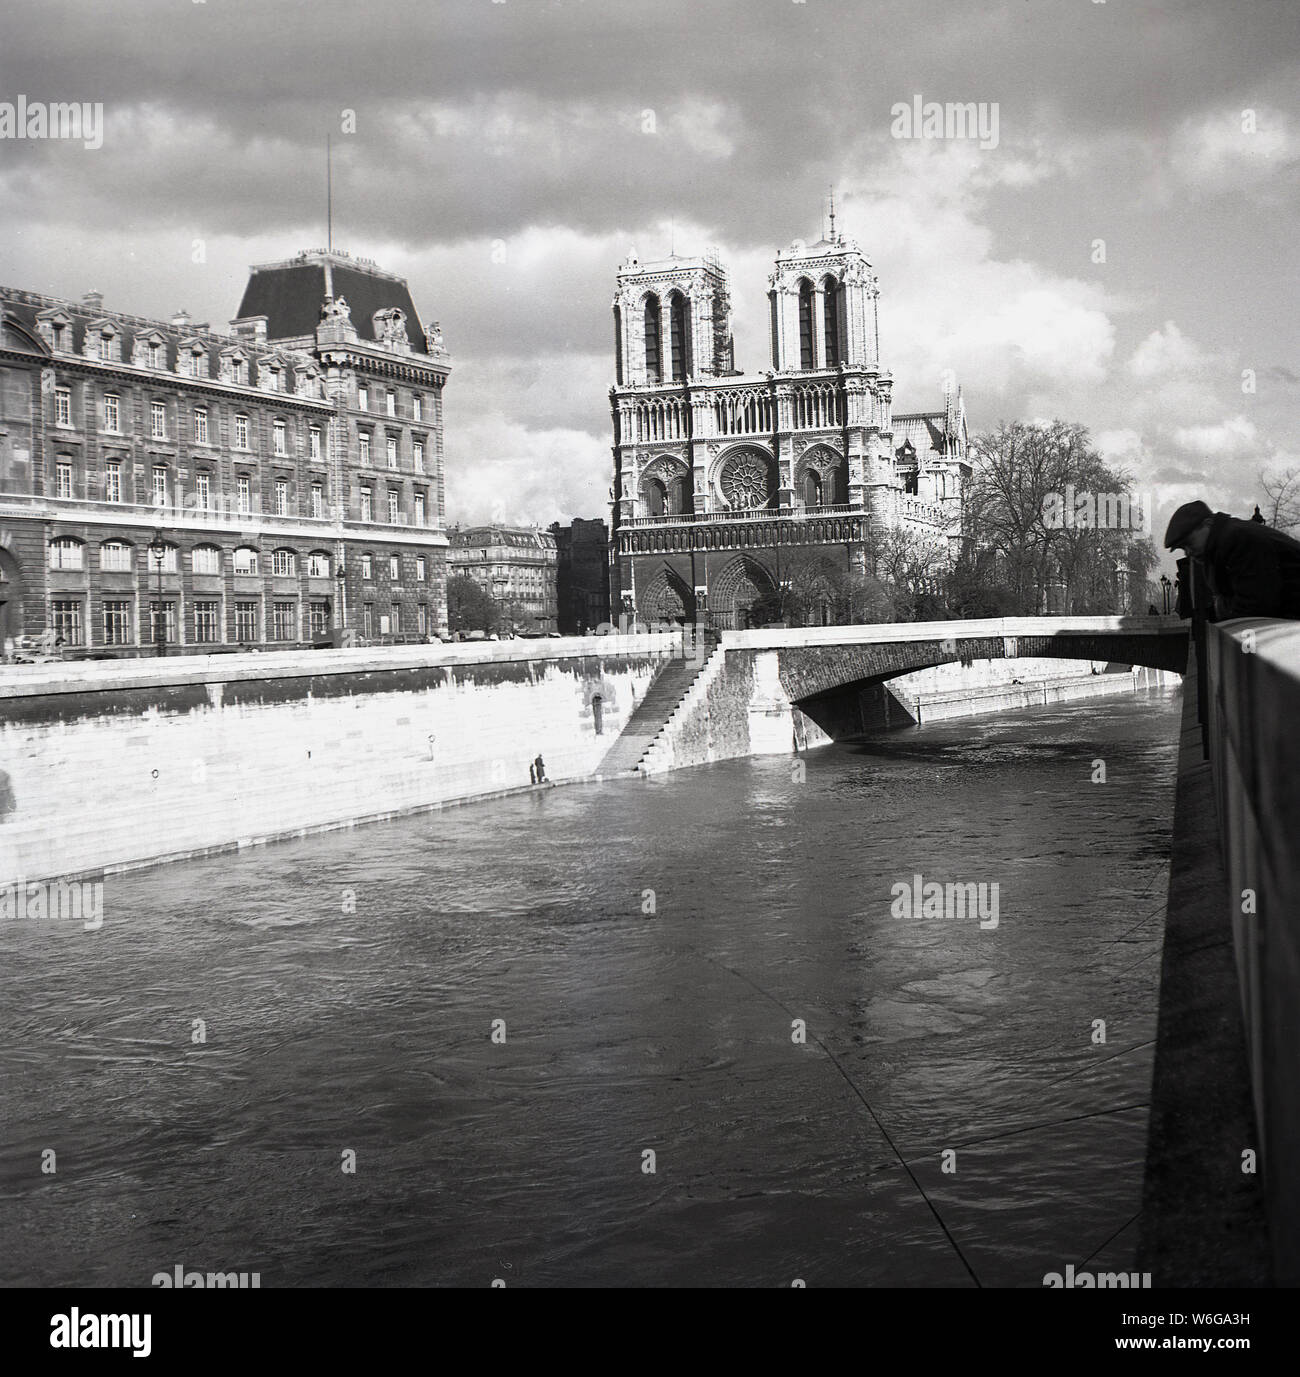 1950s, historical, The Notre-Dame Cathederal as seen from the river Seine, Paris, France. A medieval Catholic church on the IIe de la Cite in the 4th arrondissement of Paris, it is considered one of the finest examples of French Gothic architecture. Stock Photo